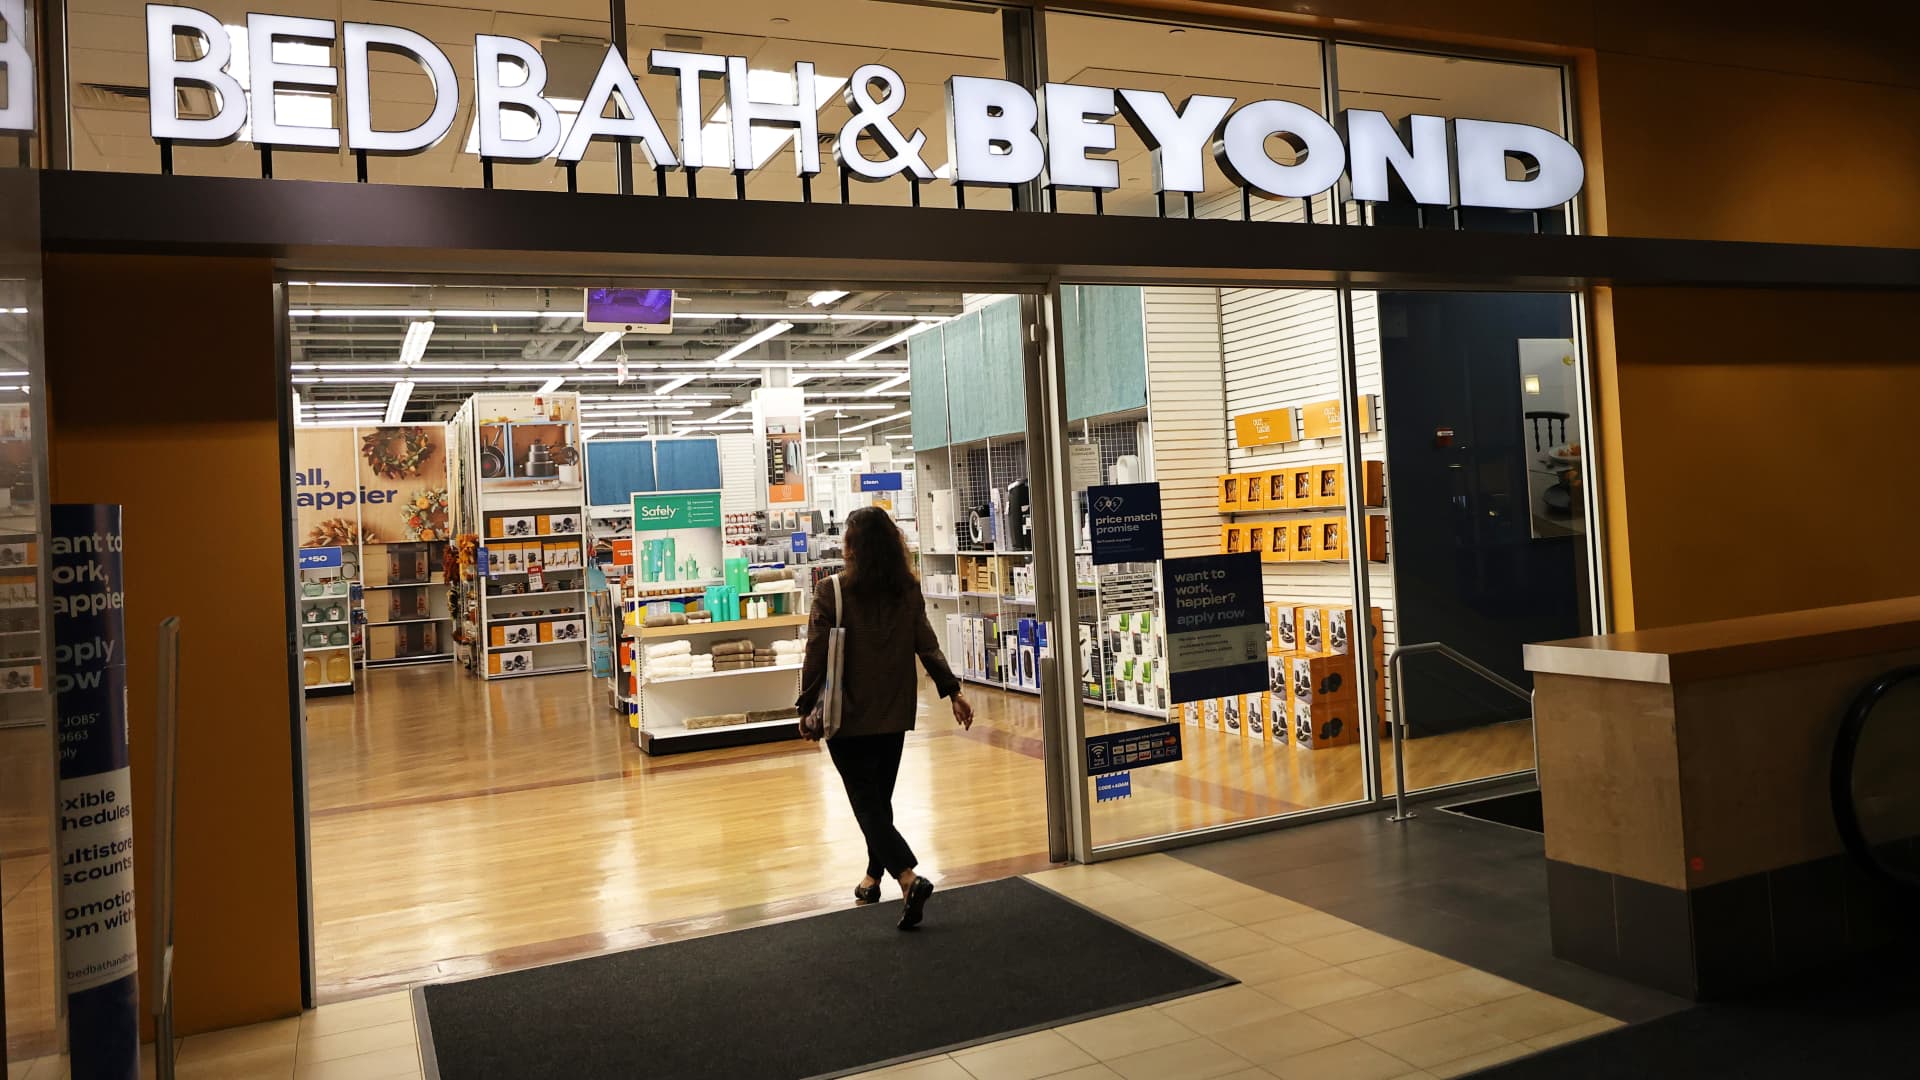 Stocks making the biggest moves midday: Bed Bath & Beyond, Nio, Joby Aviation, Teva & more